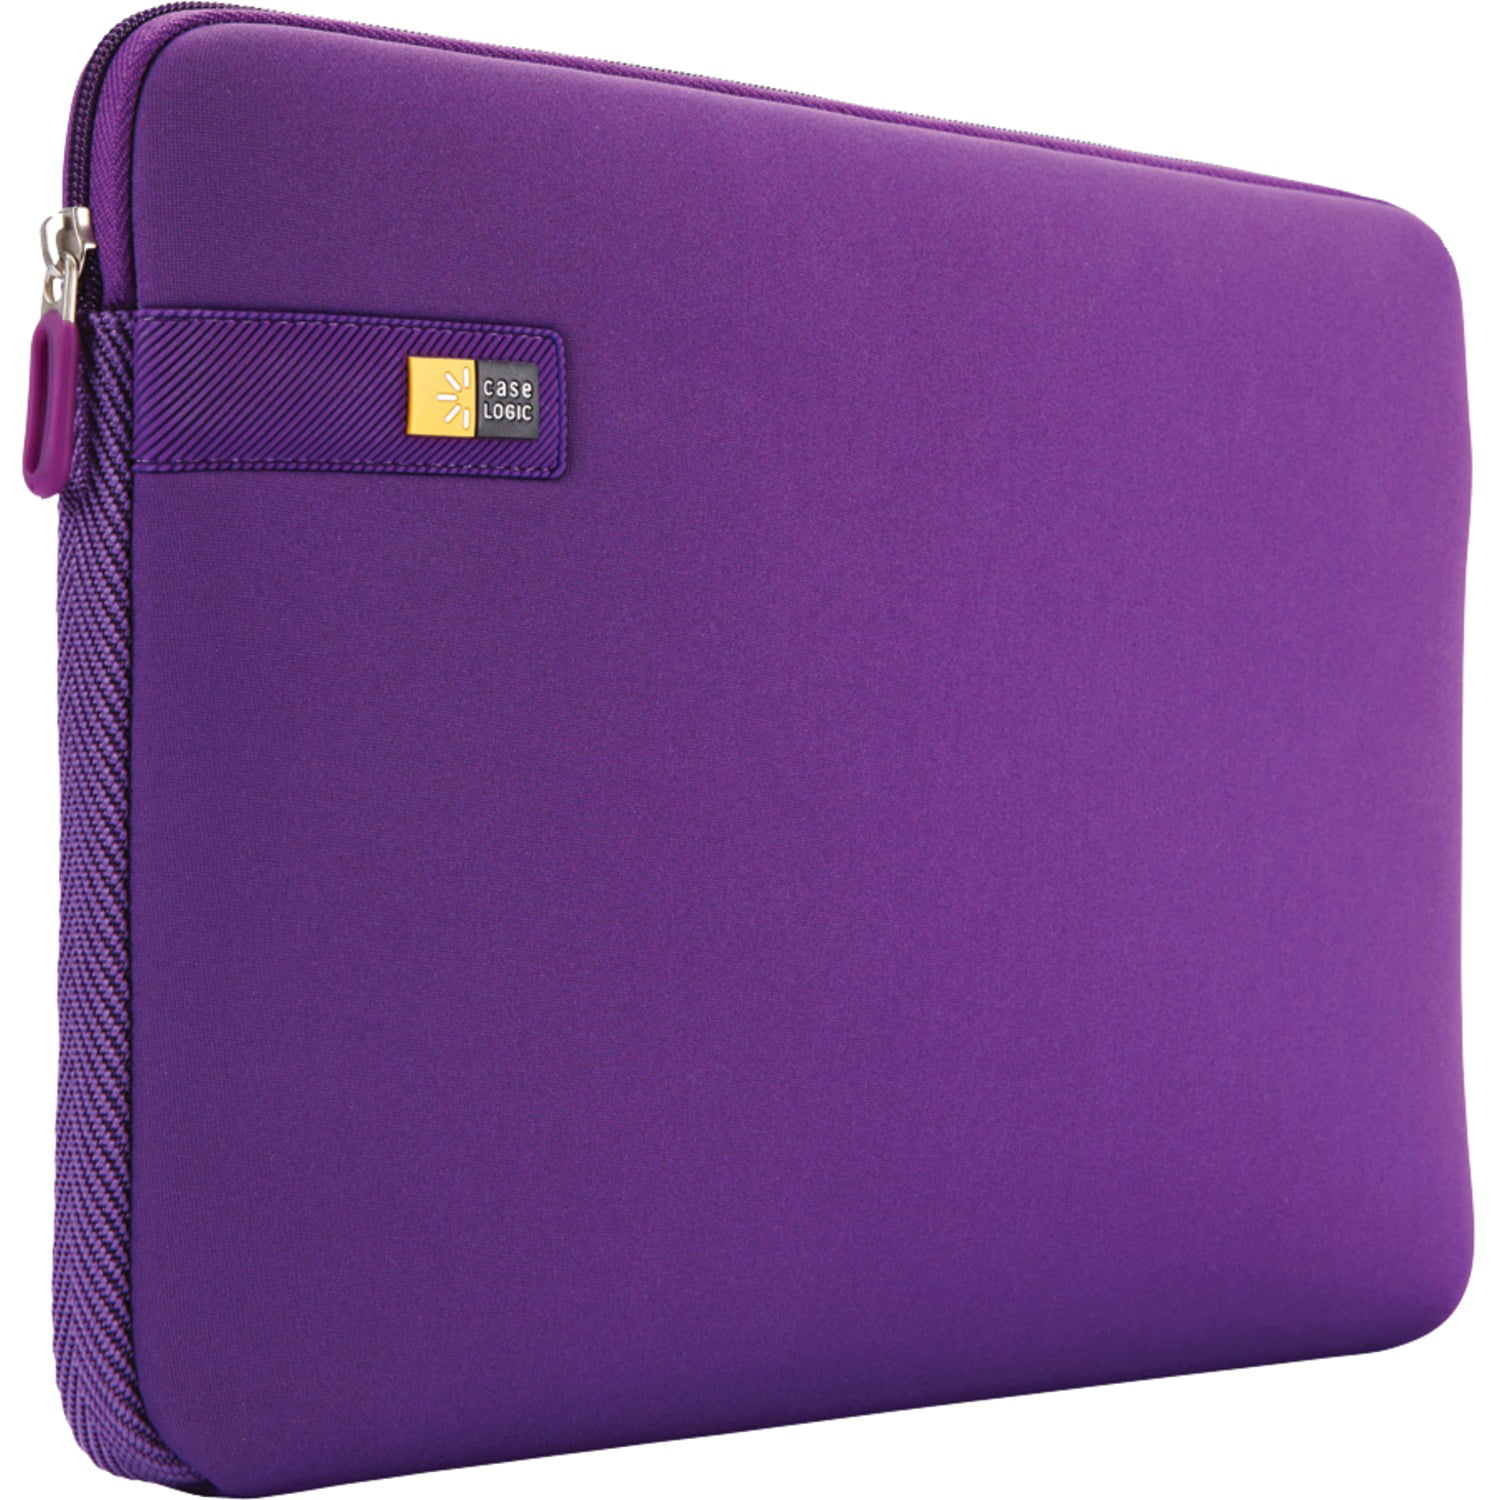 Profile Series Purple Leather Luxury Laptop Case Compatible with The MSI Creator P65 Laptop Broonel